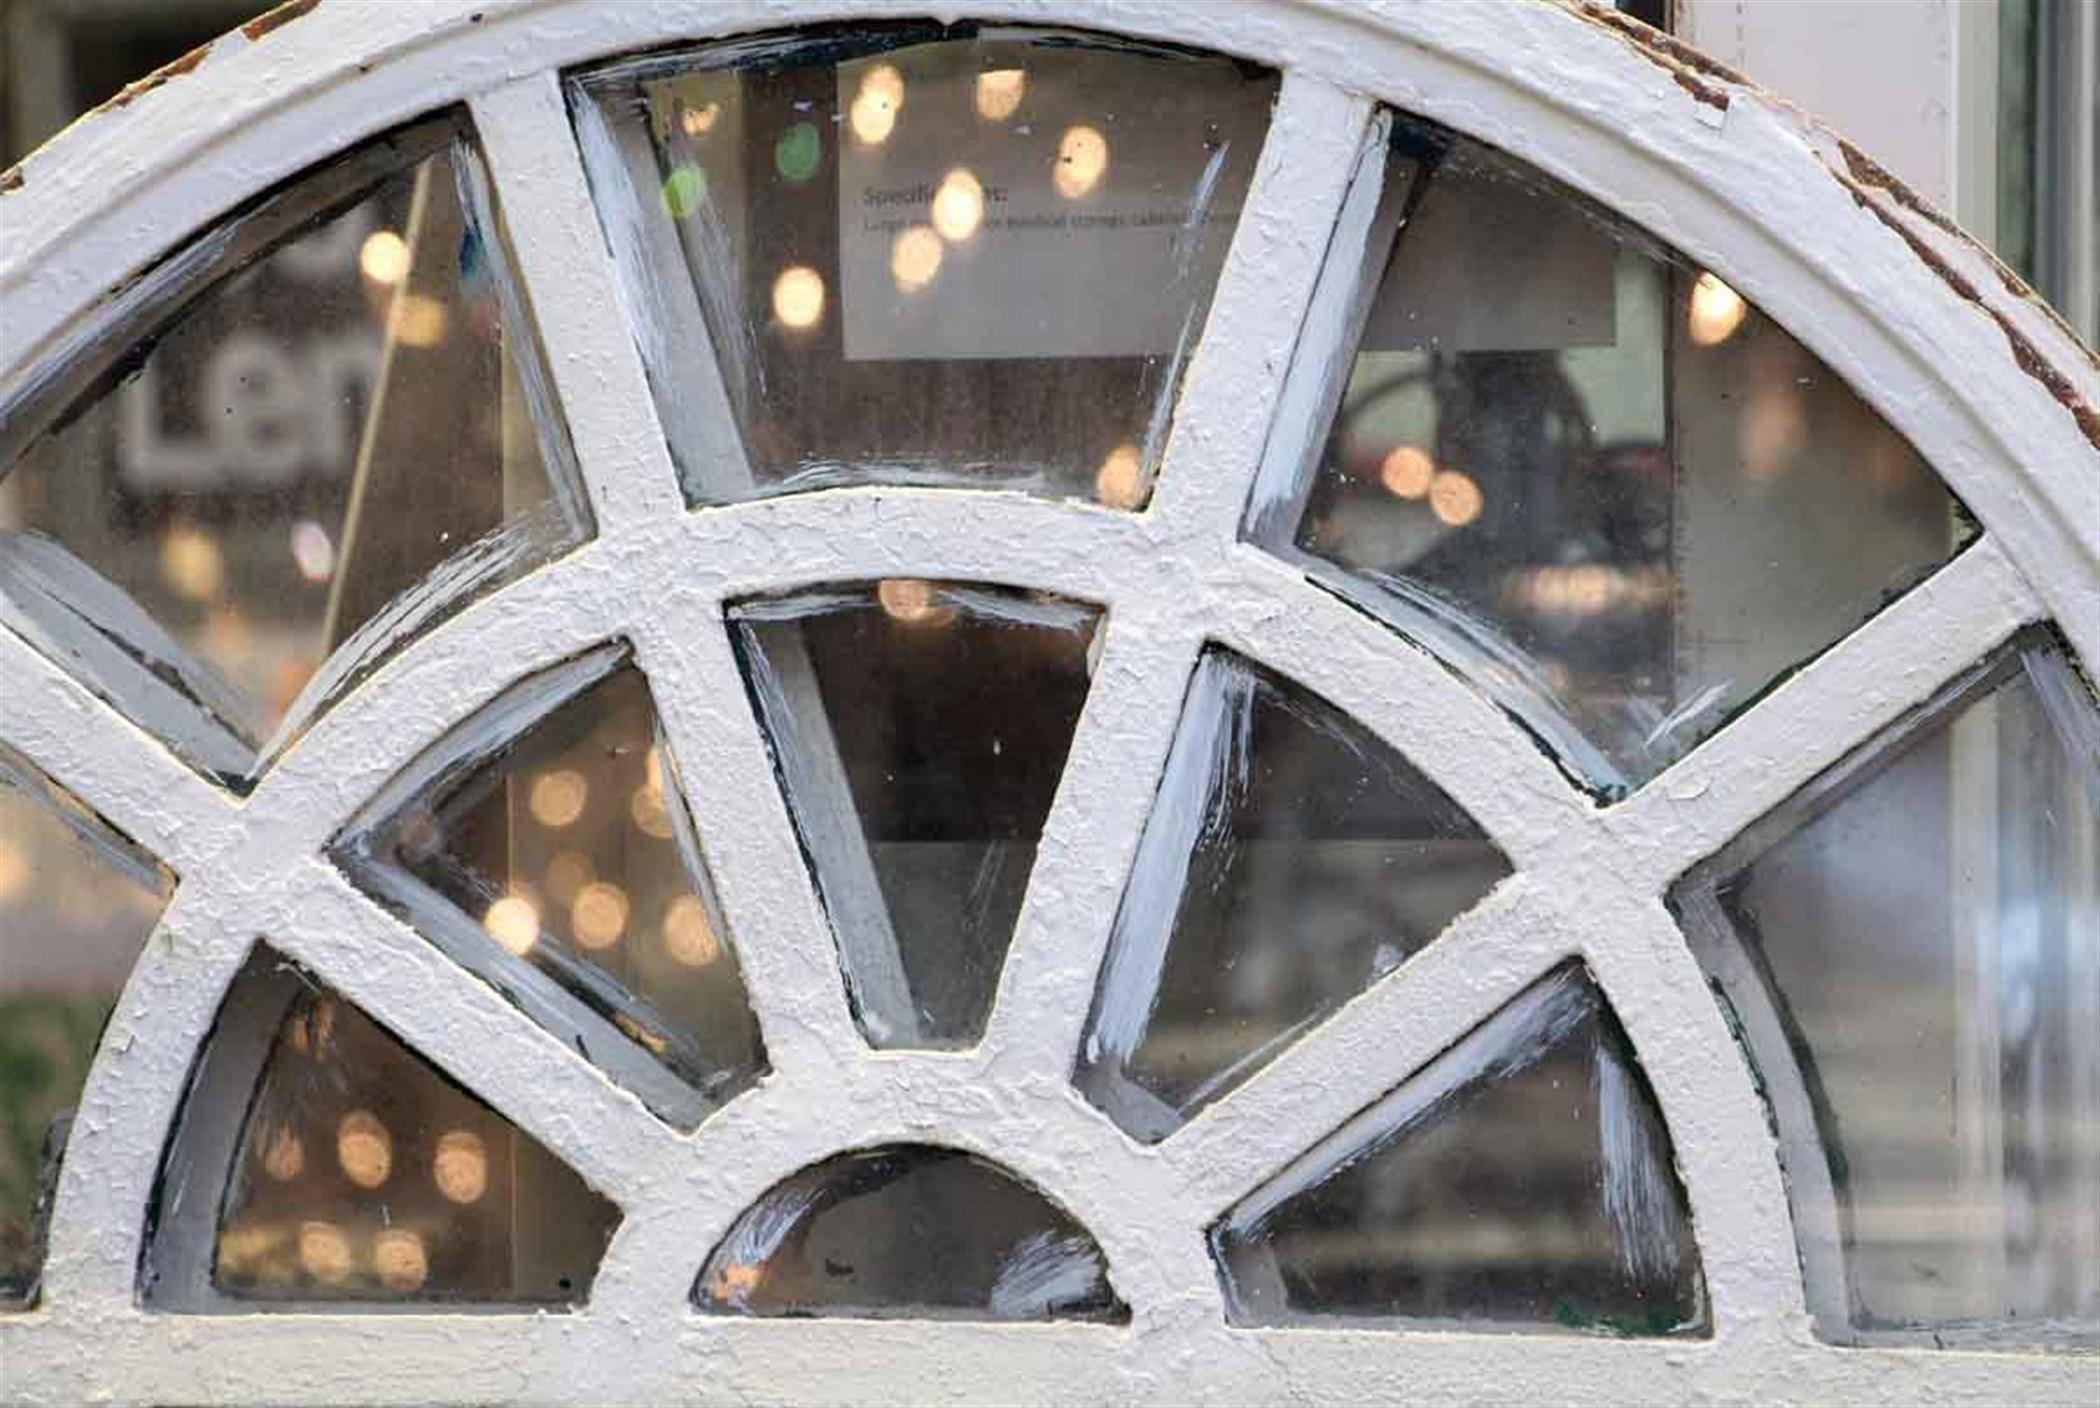 Steel frame palladium windows salvaged from Rockland State Hospital from 1930. Please note some panes are plain and some are chicken wire glass. Some frames are painted white on one side and green on the other. We have a large amount of these